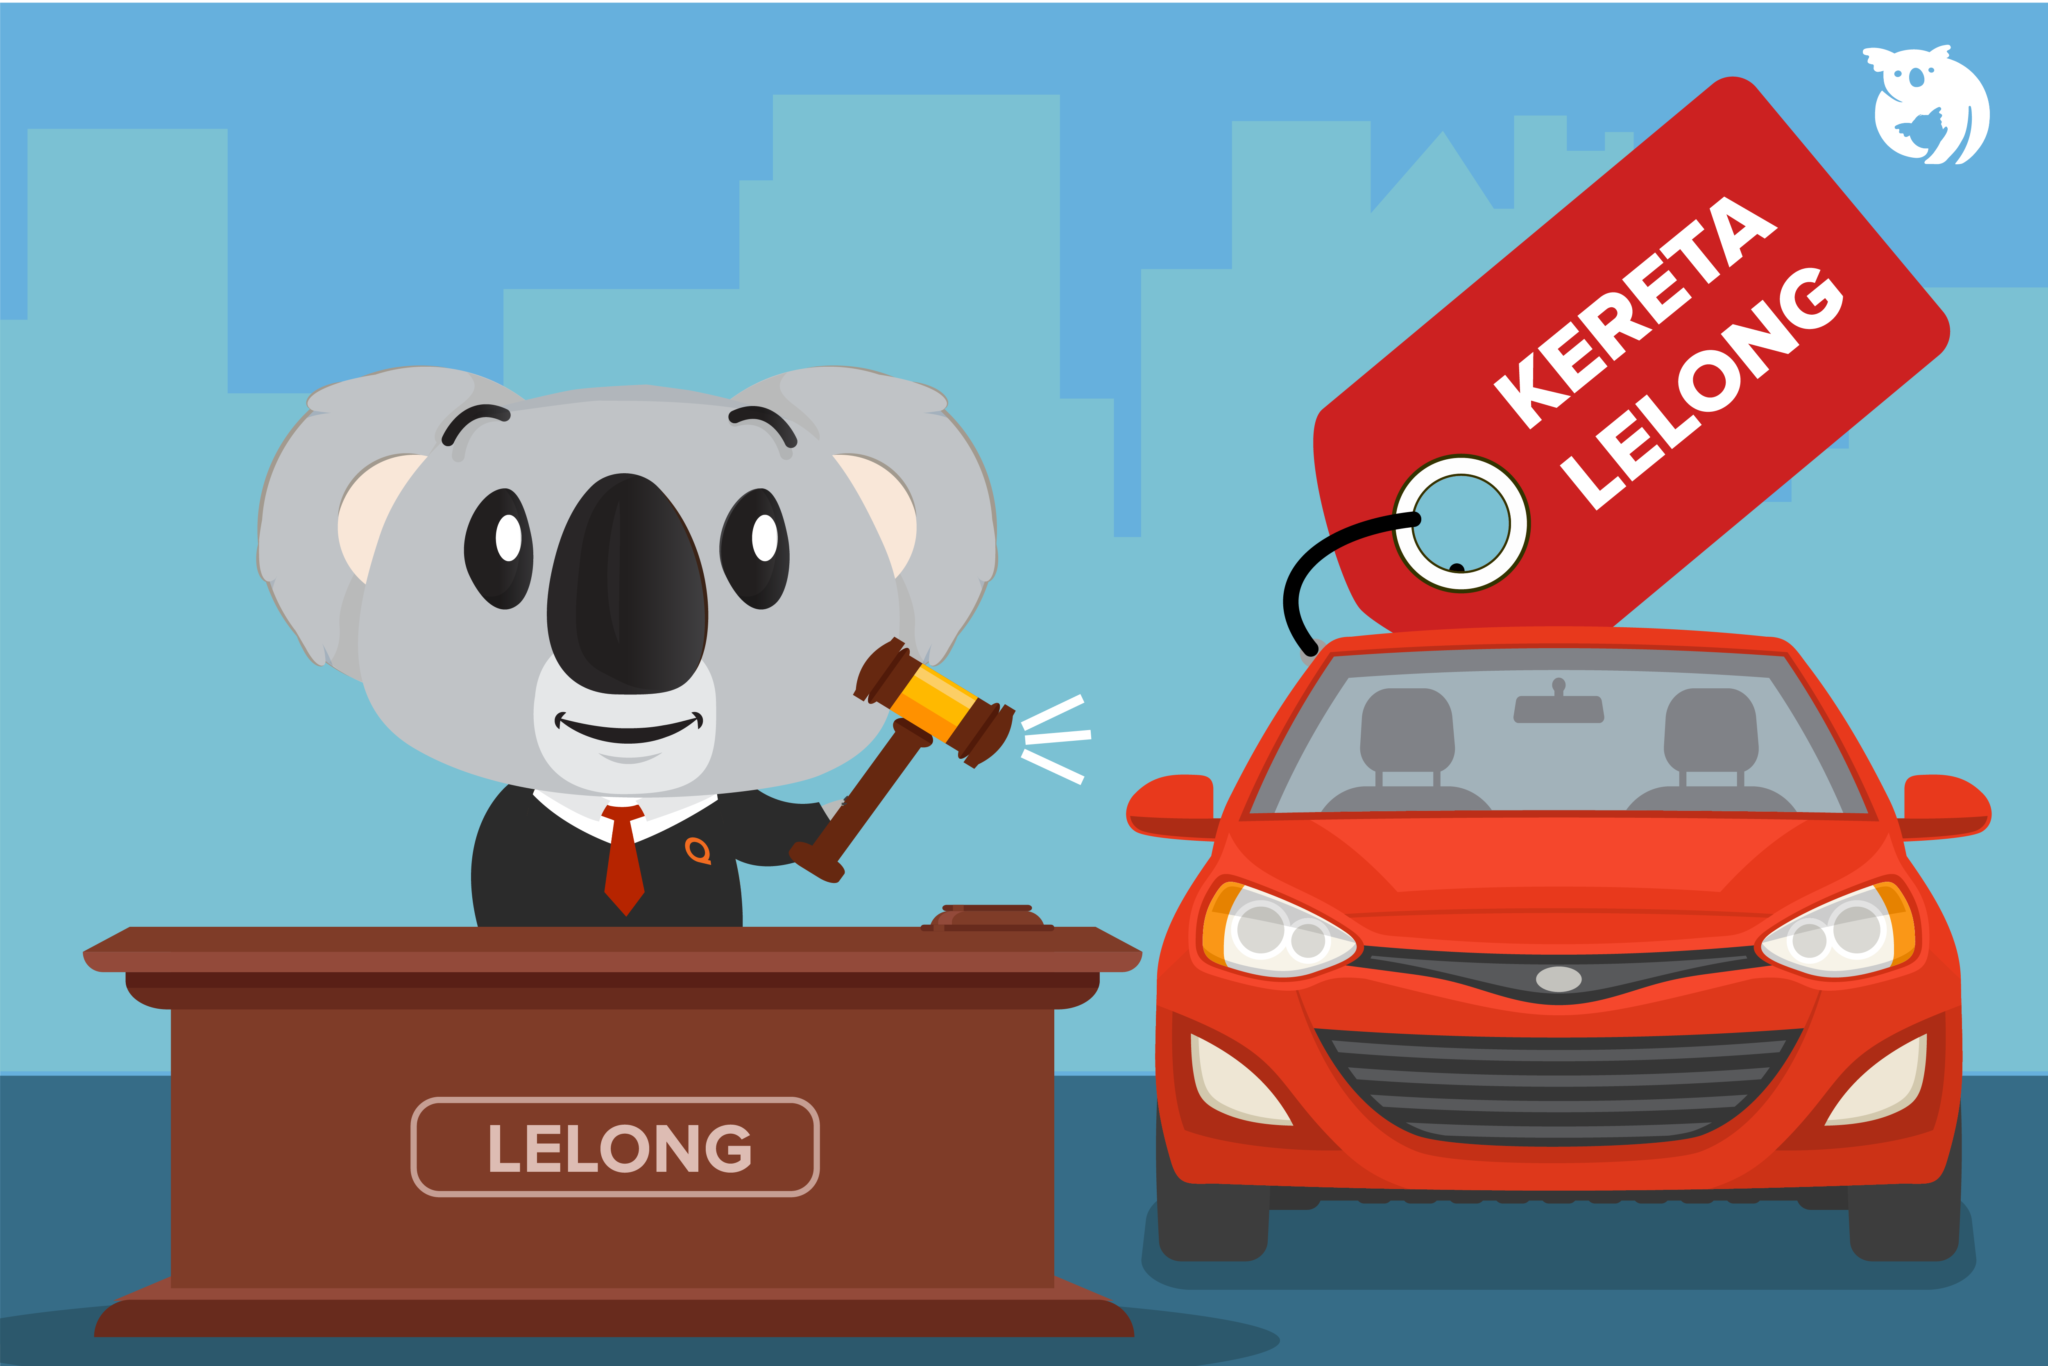 Car Auction Malaysia: 5 Risks to Consider Before Making a Purchase